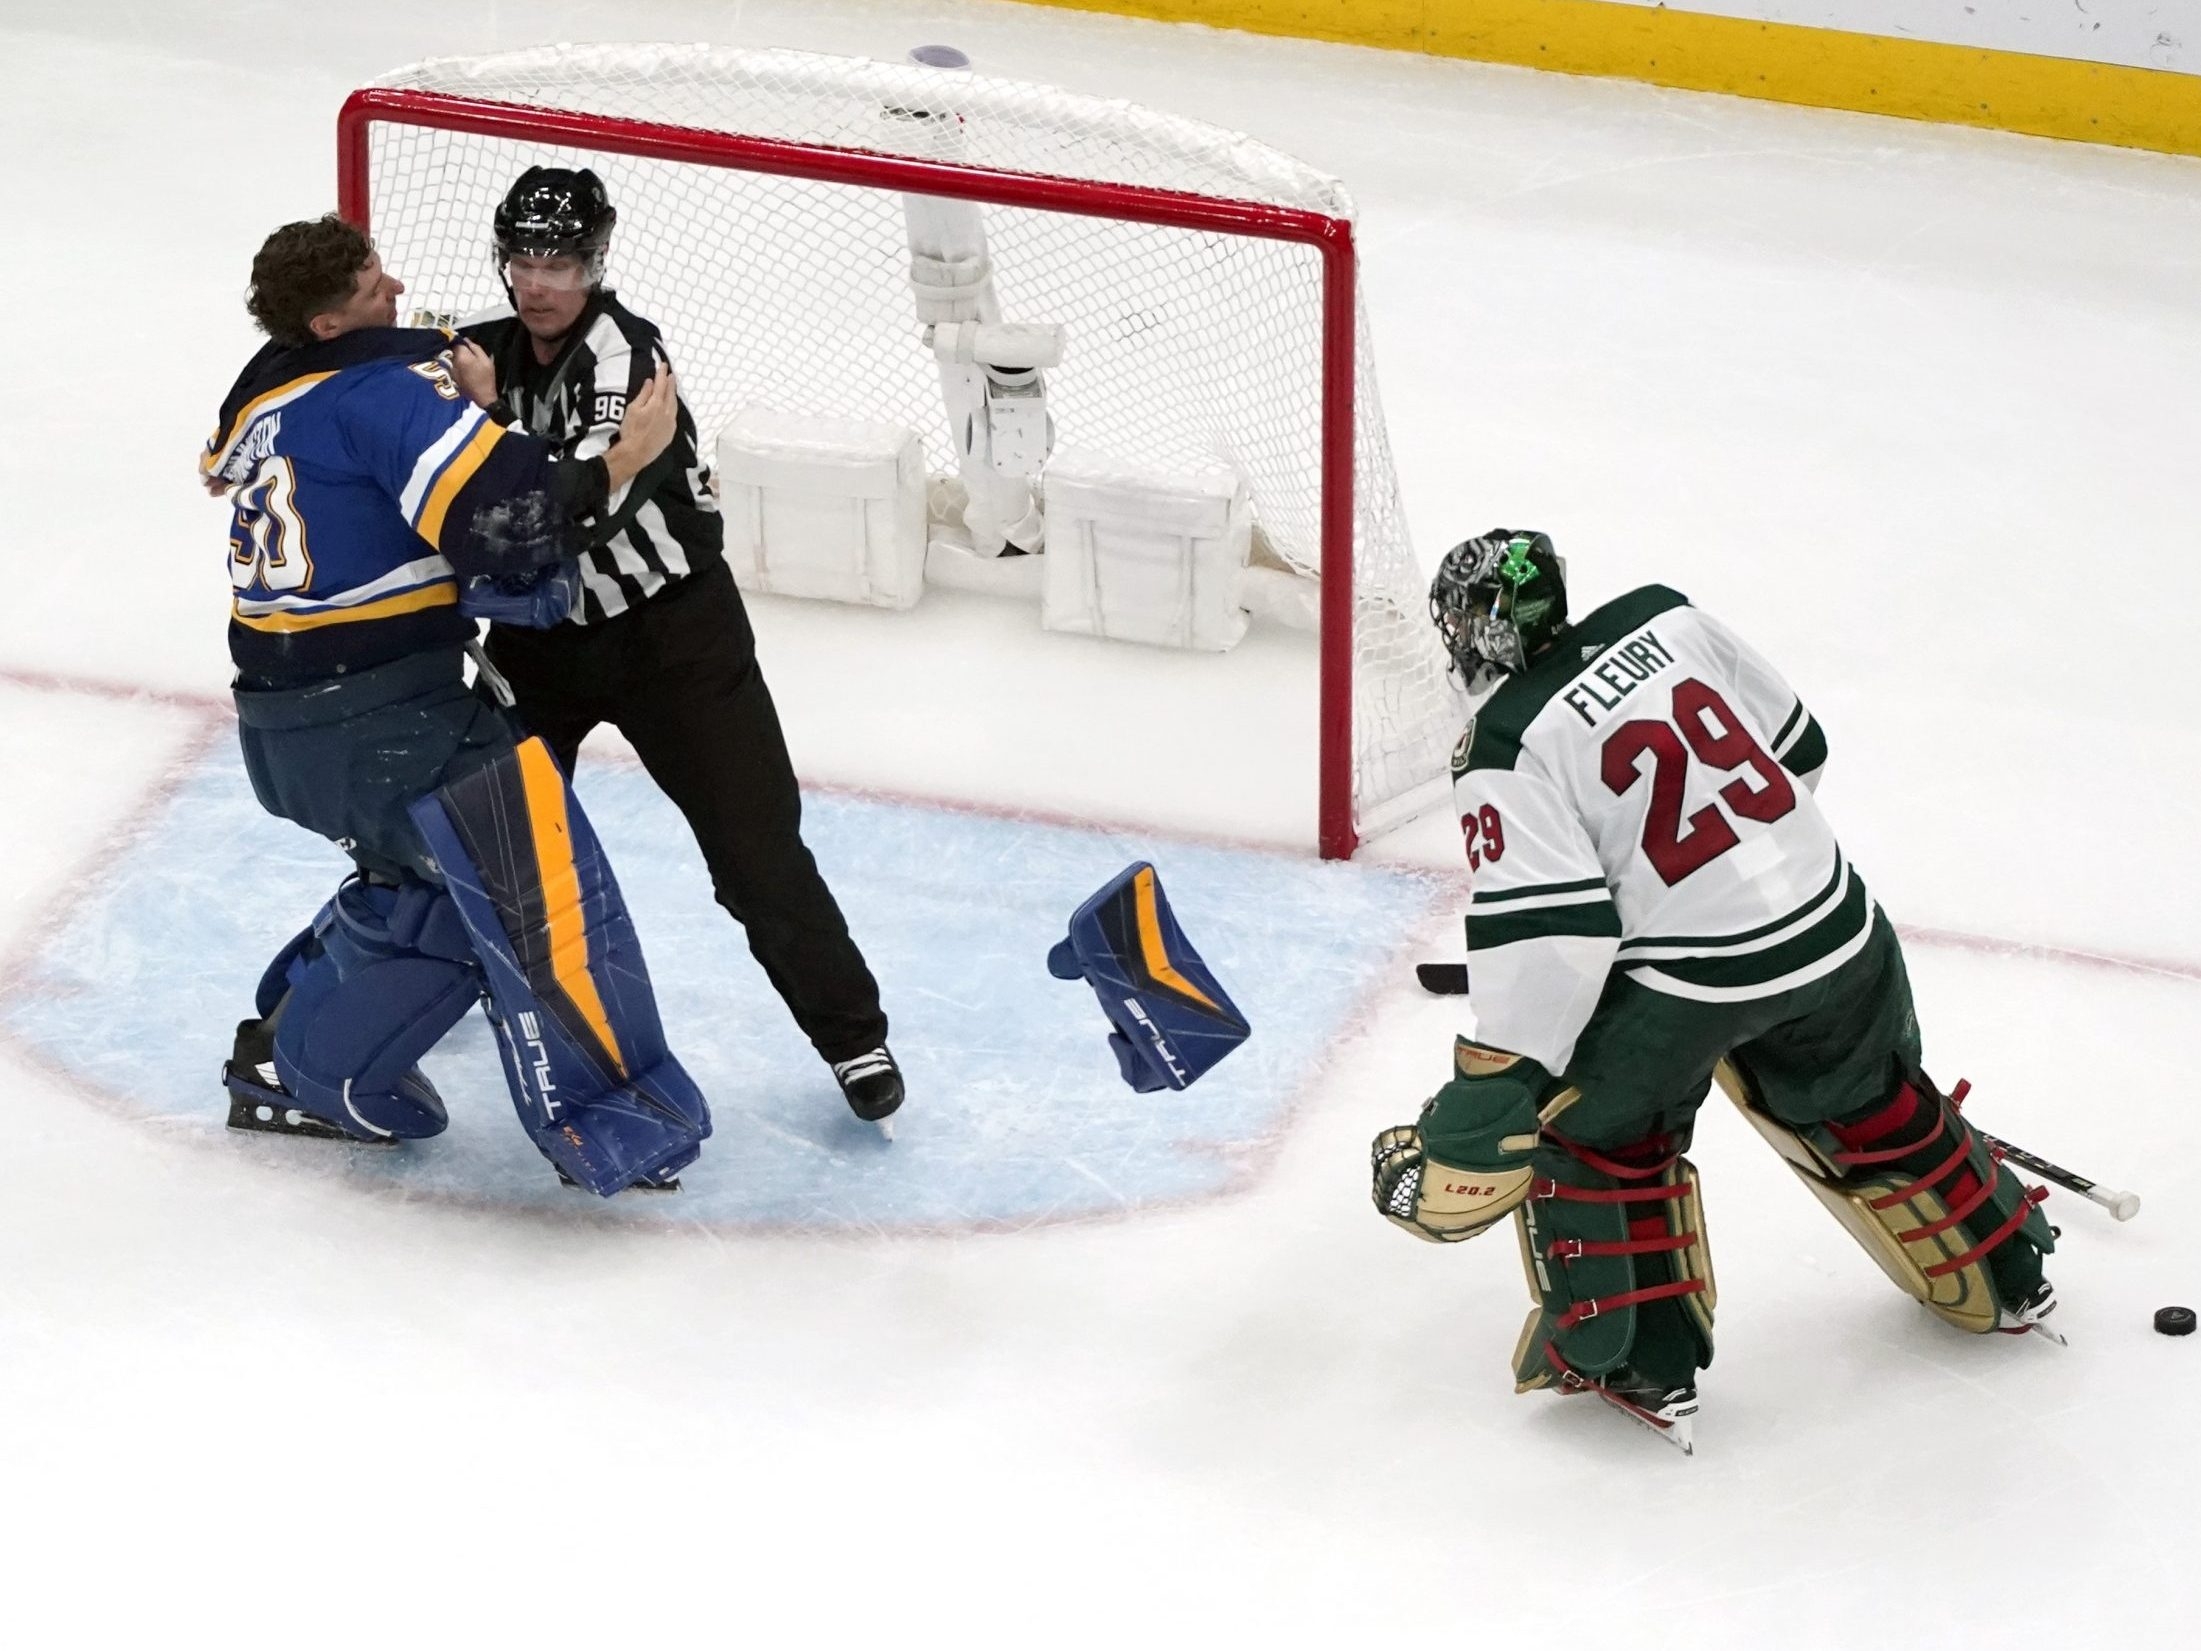 Jordan Binnington gets ejected for sparking a scrum after the Wild's